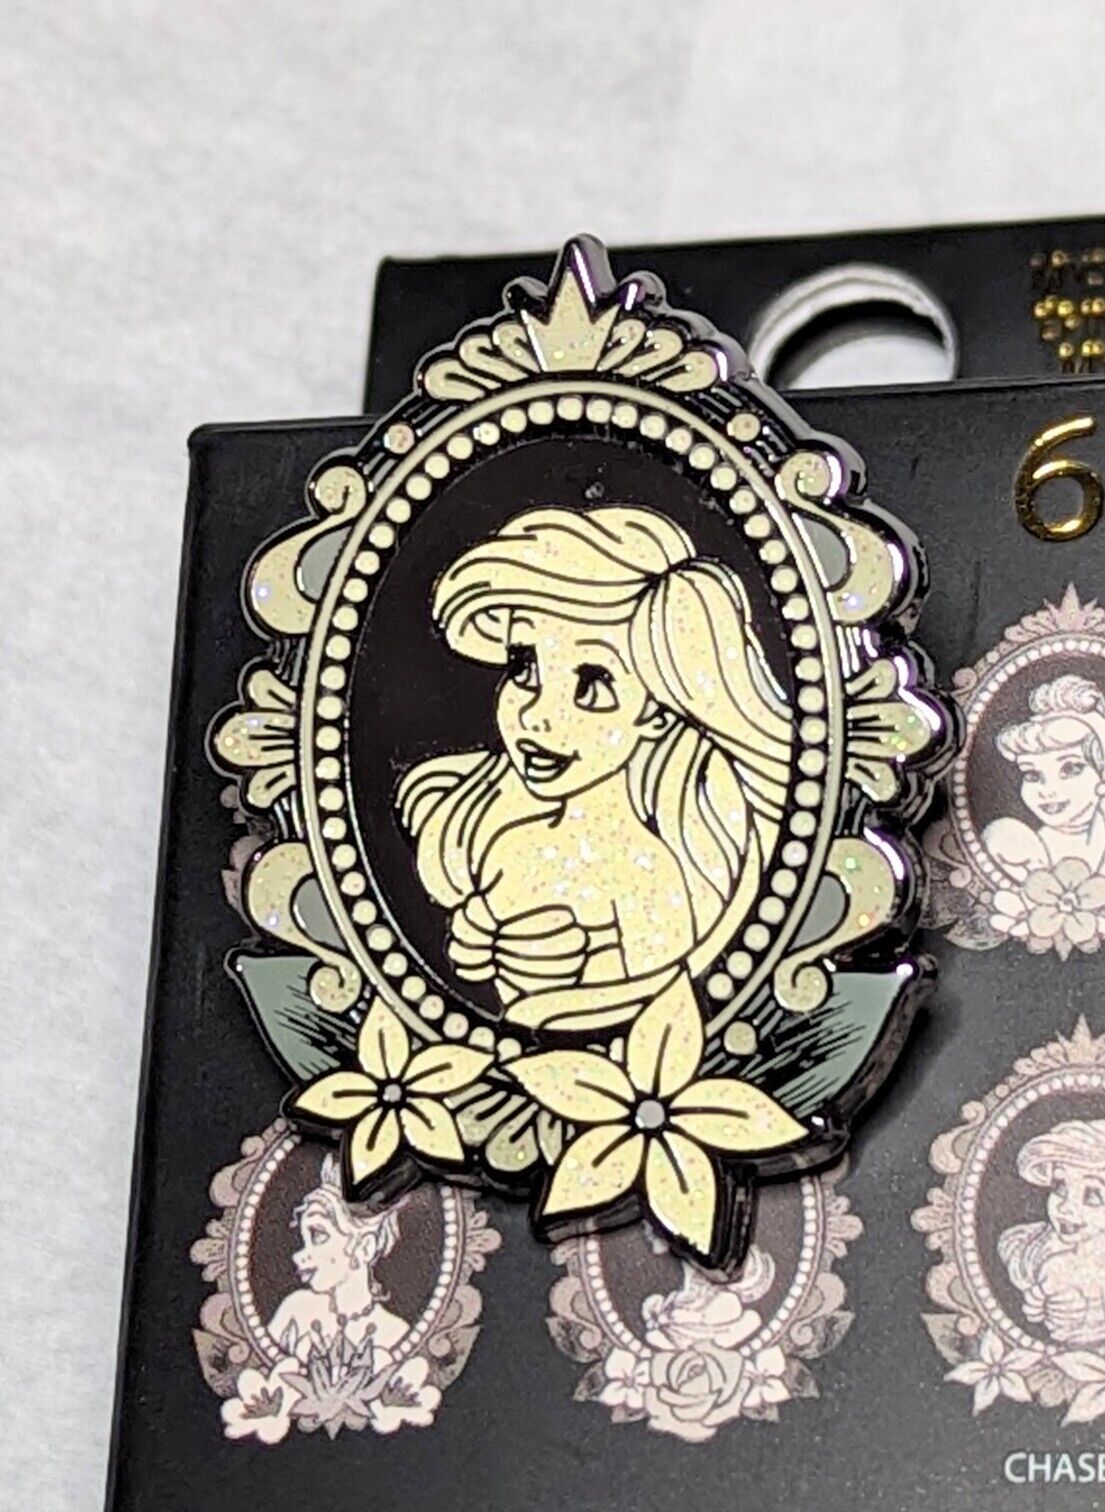 Loungefly Disney Princess Cameo Blind Box Pin - Ariel Glitter CHASE - Opened 